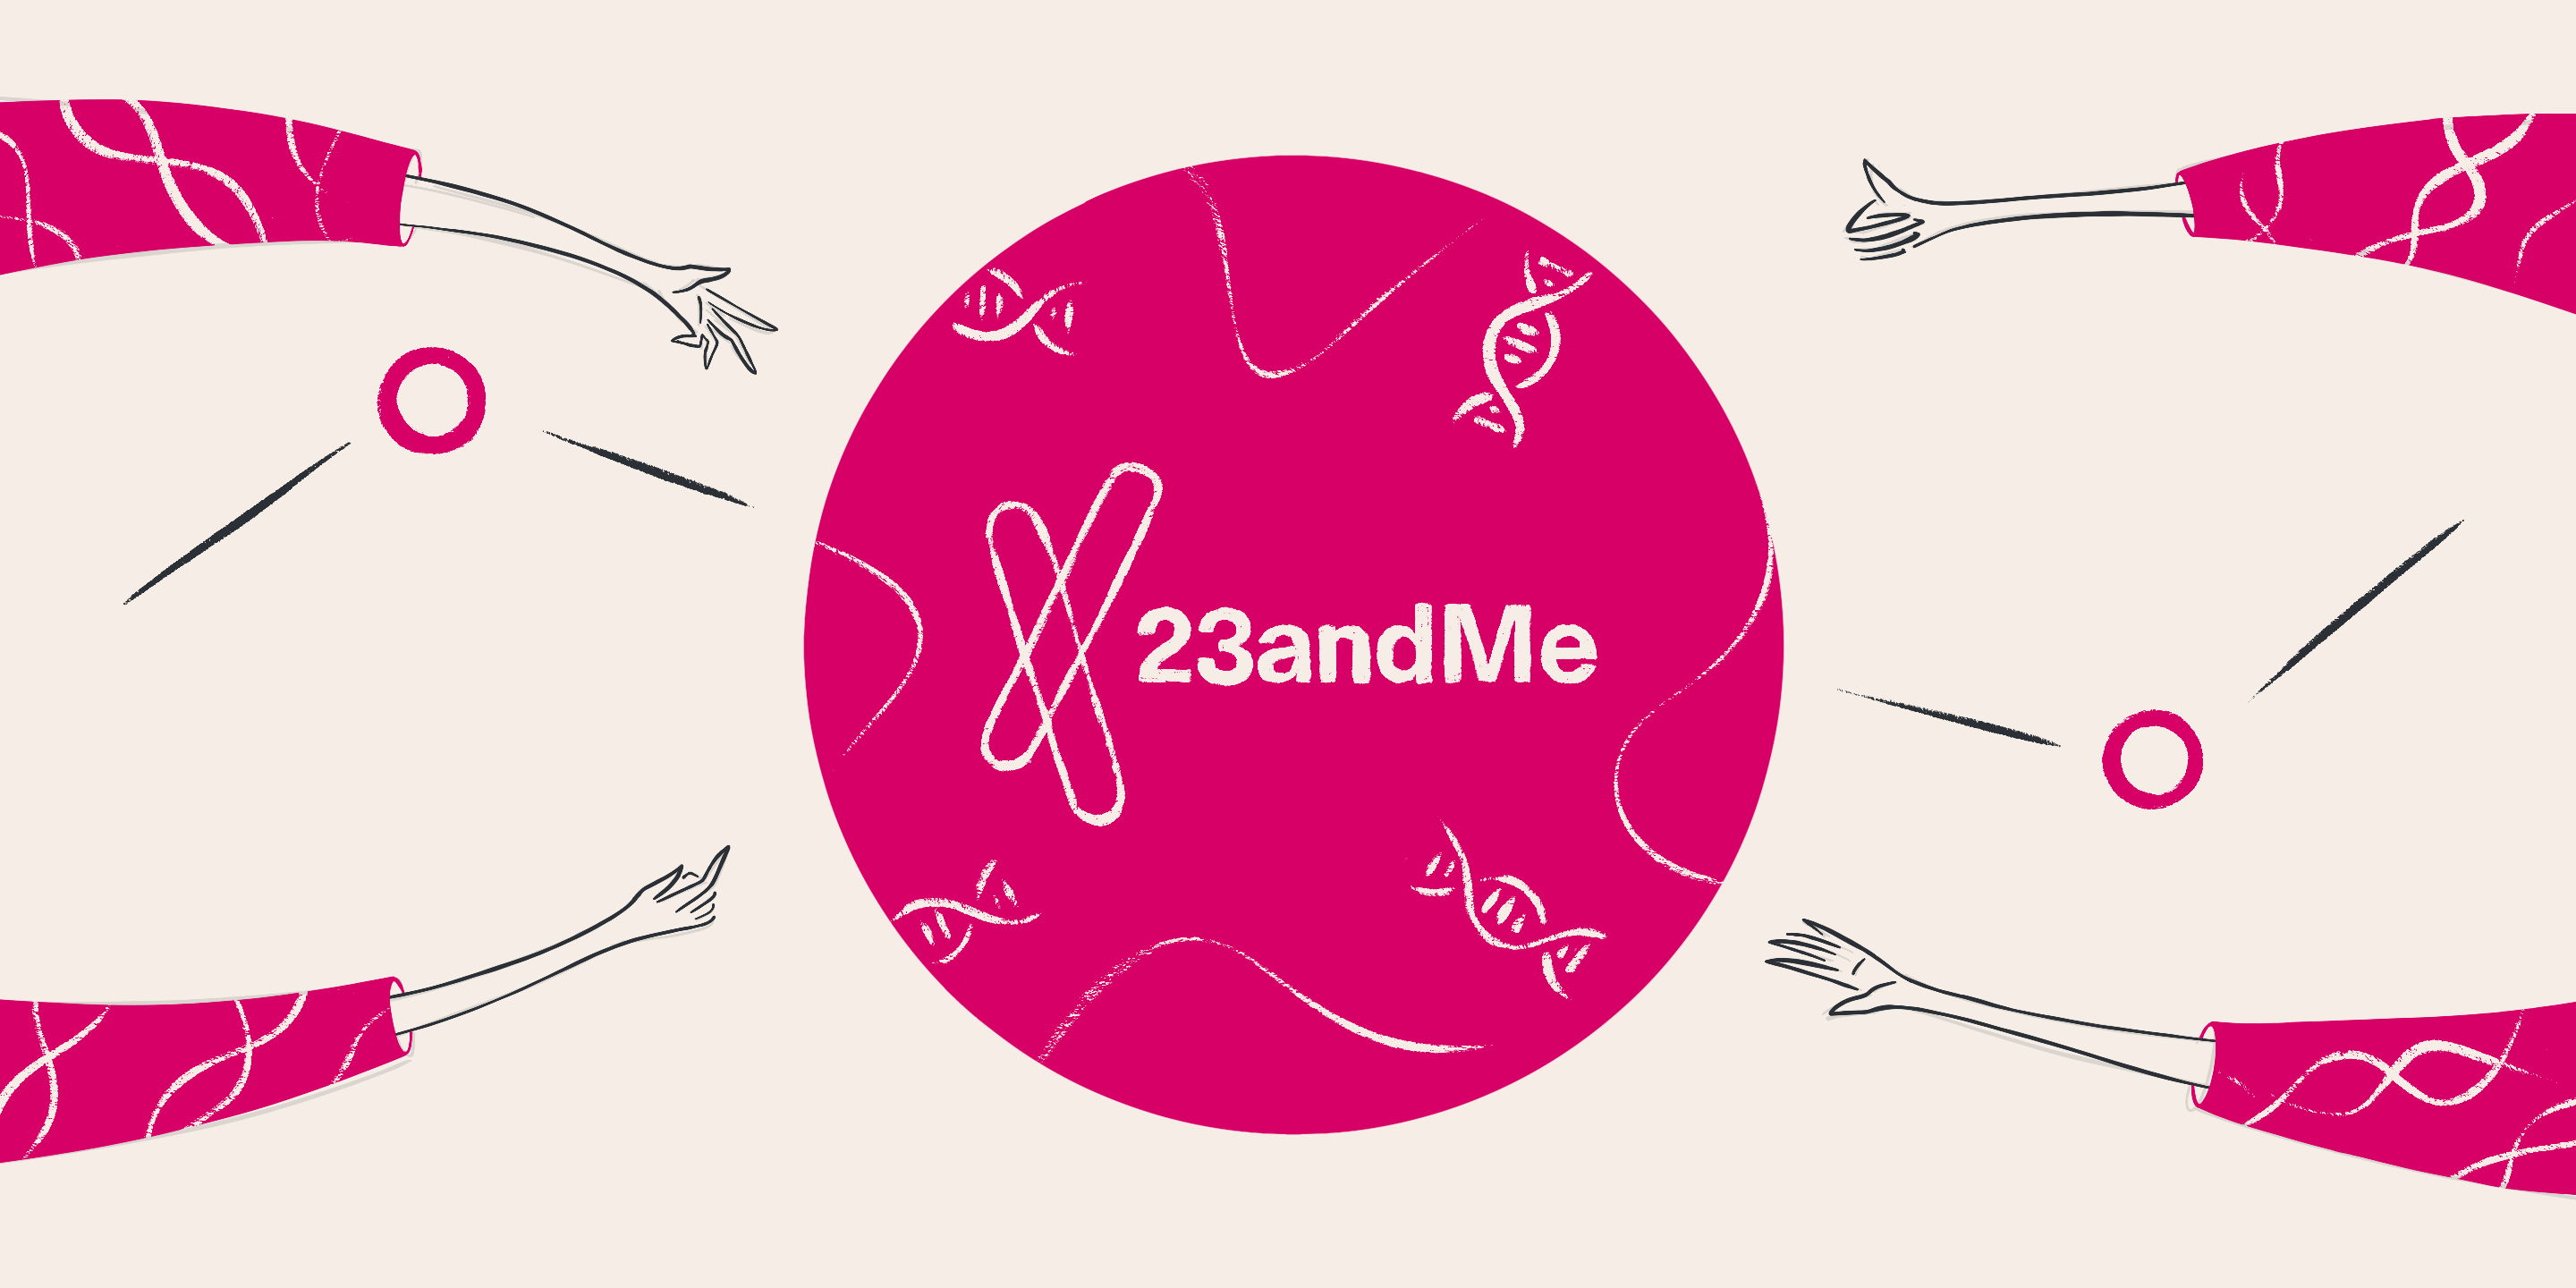 What to know about the 2021 23andMe IPO | Public.com